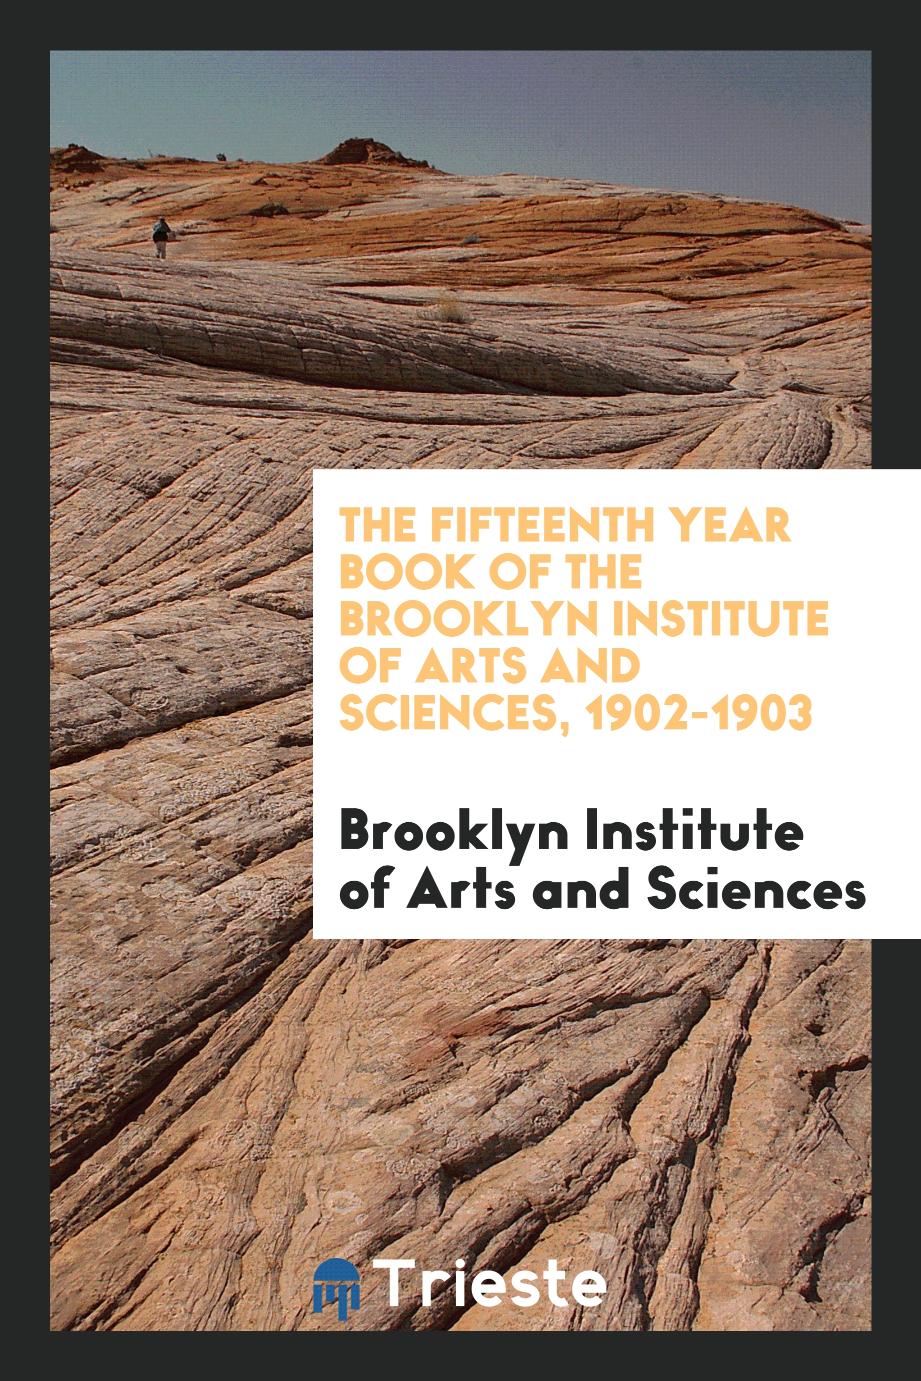 The Fifteenth Year Book of the Brooklyn Institute of Arts and Sciences, 1902-1903